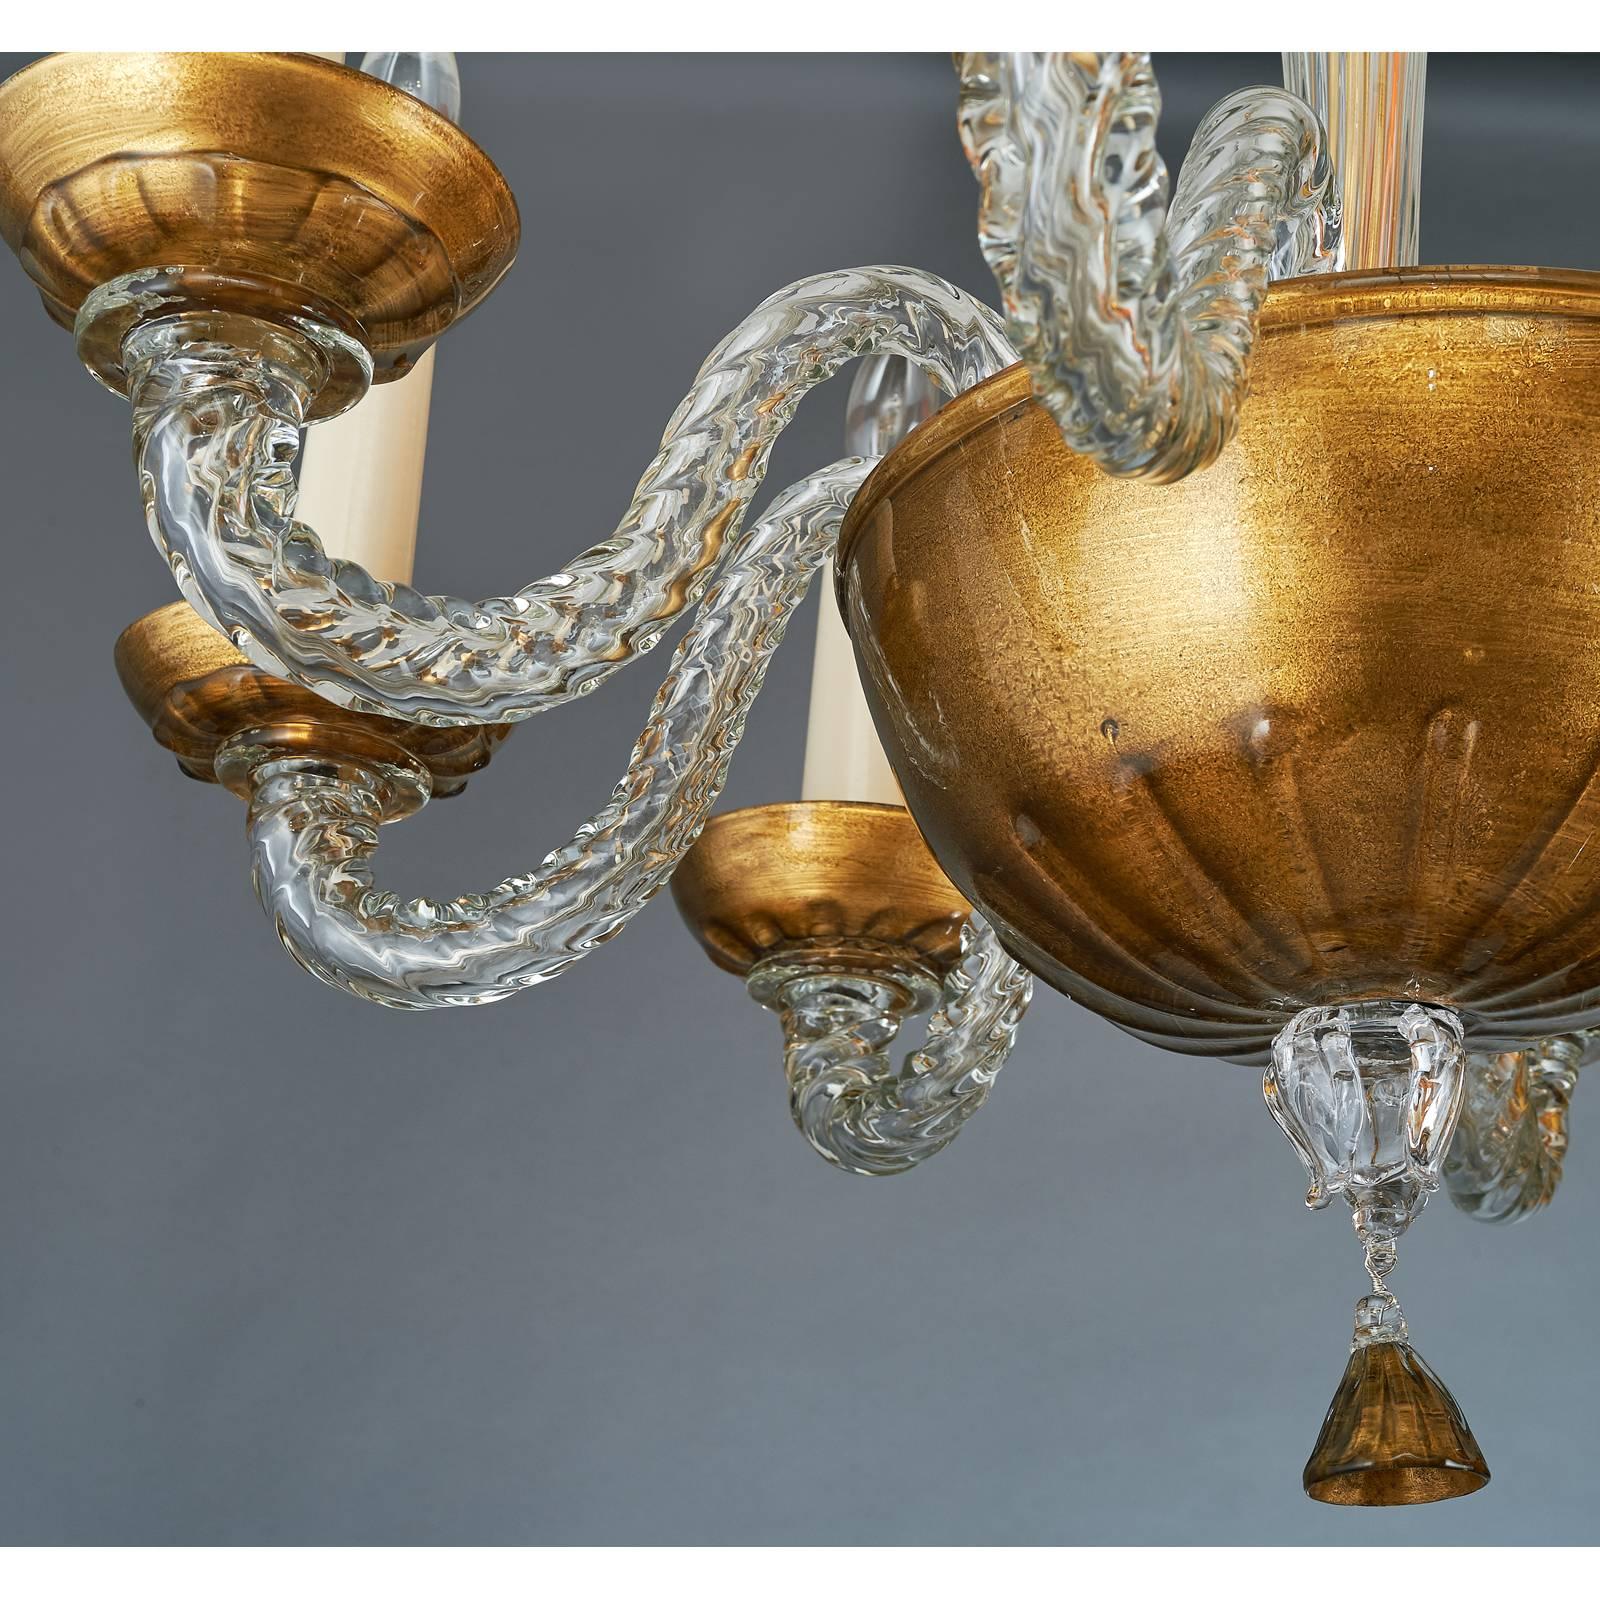 Paolo Venini (1895-1959)
An exquisite eight branch Murano chandelier in 